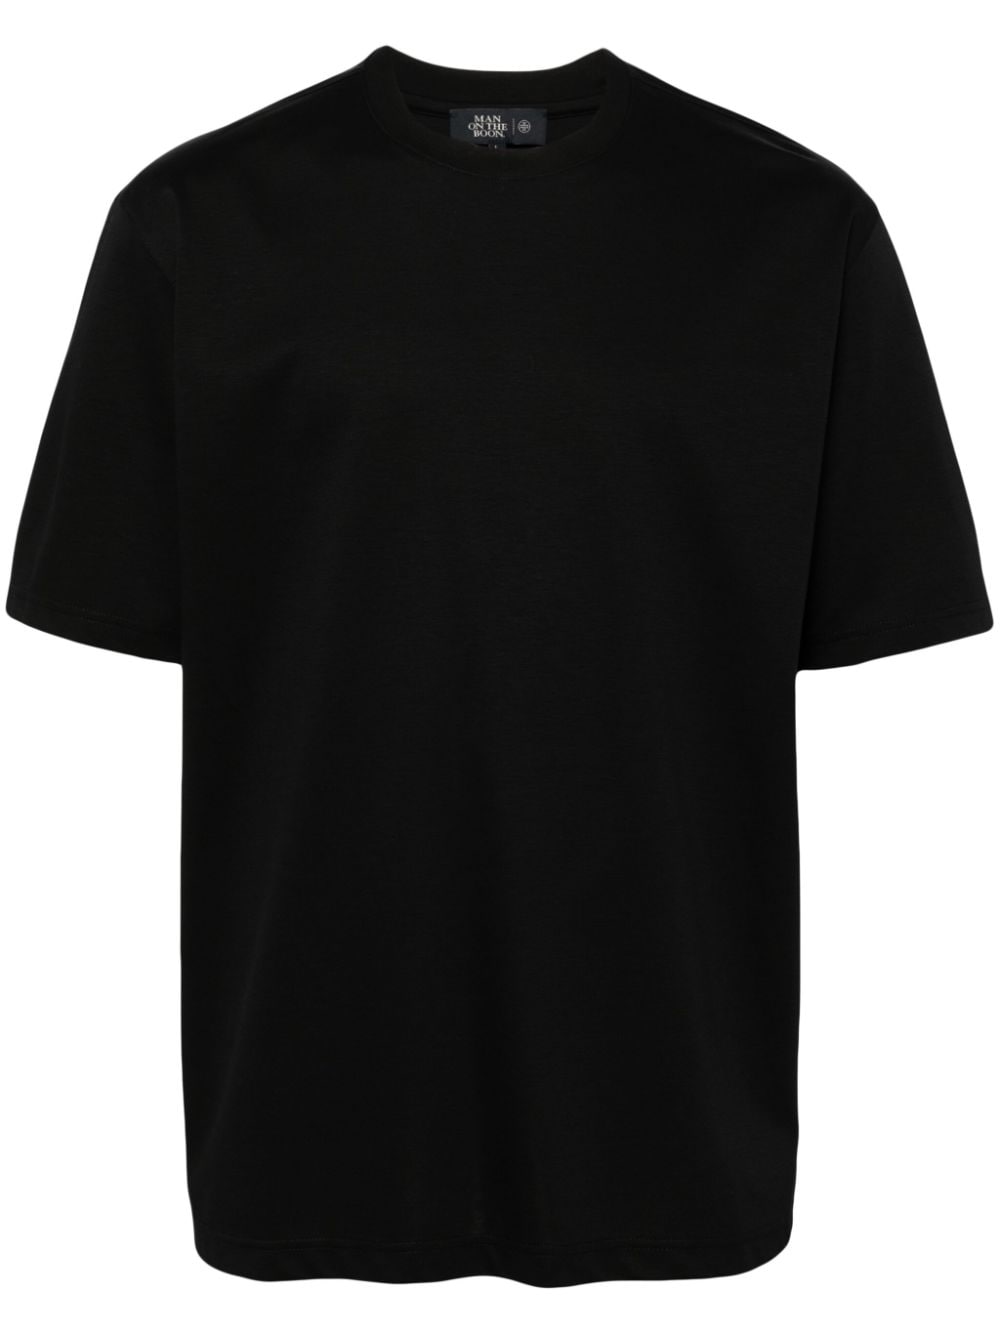 Man On The Boon. Glossy Crew-neck Cotton T-shirt In Black